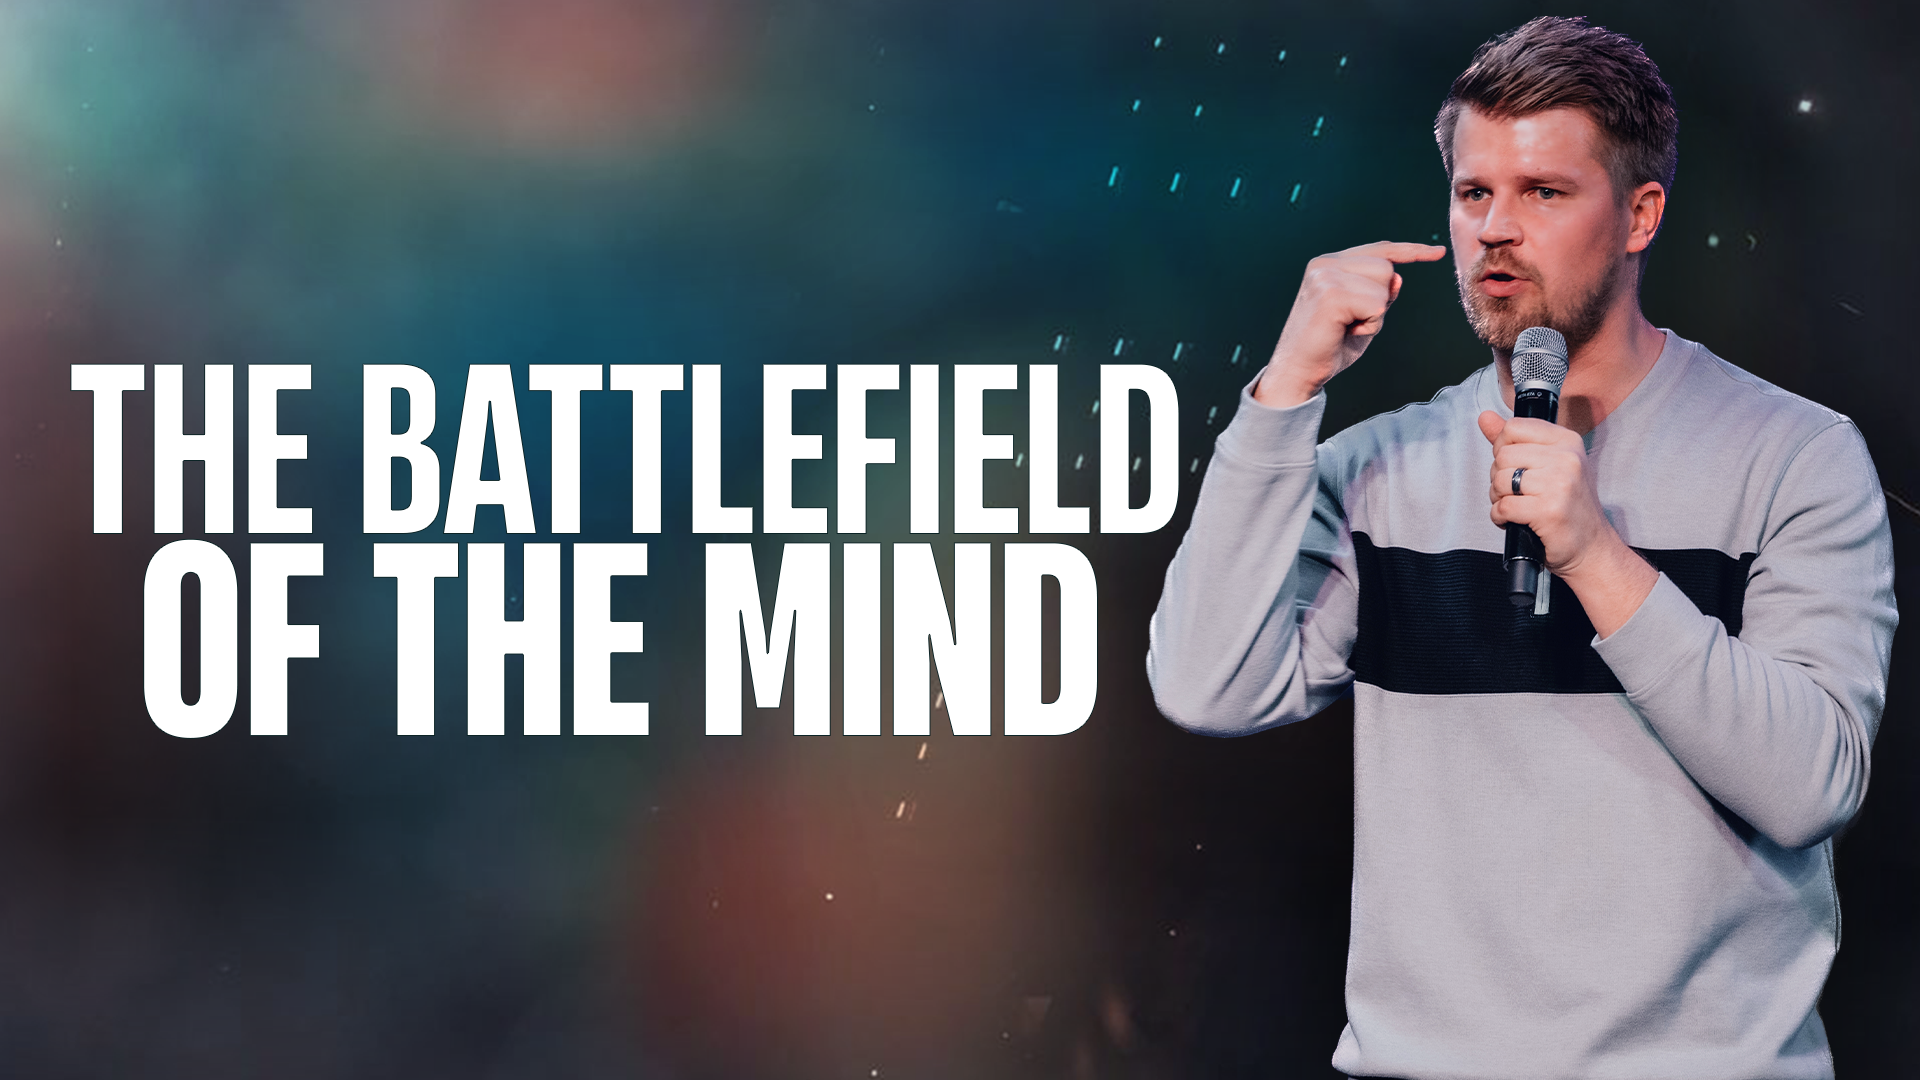 Featured Image for “The Battlefield Of The Mind”